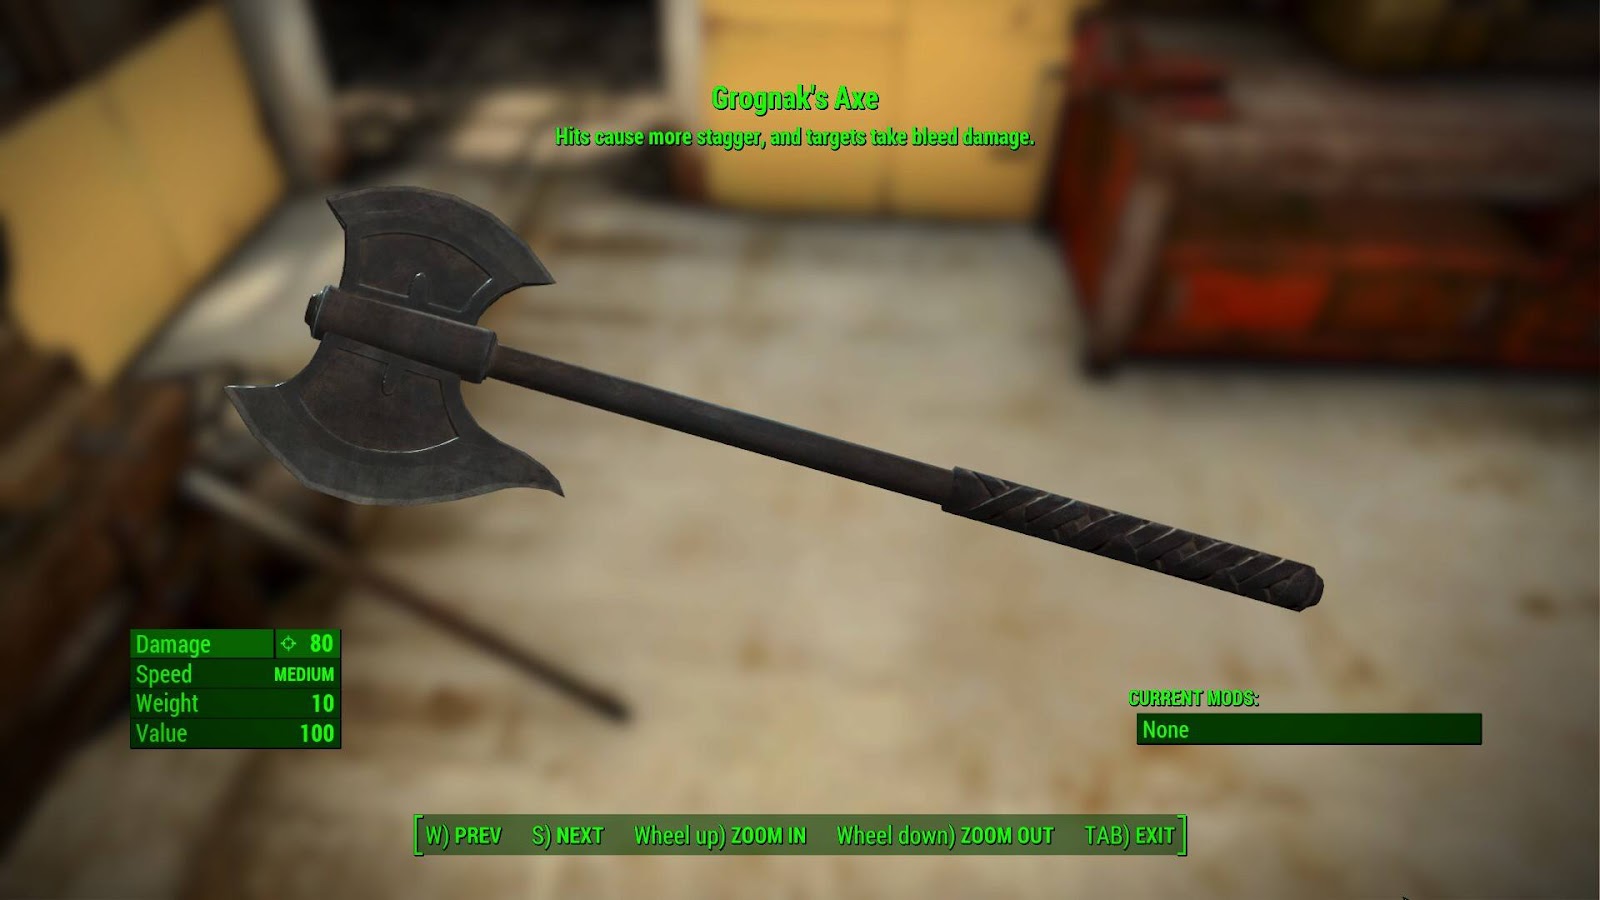 Grognak's Axe, a two-handed double-sided axe, viewed through the inventory UI of Fallout 4.